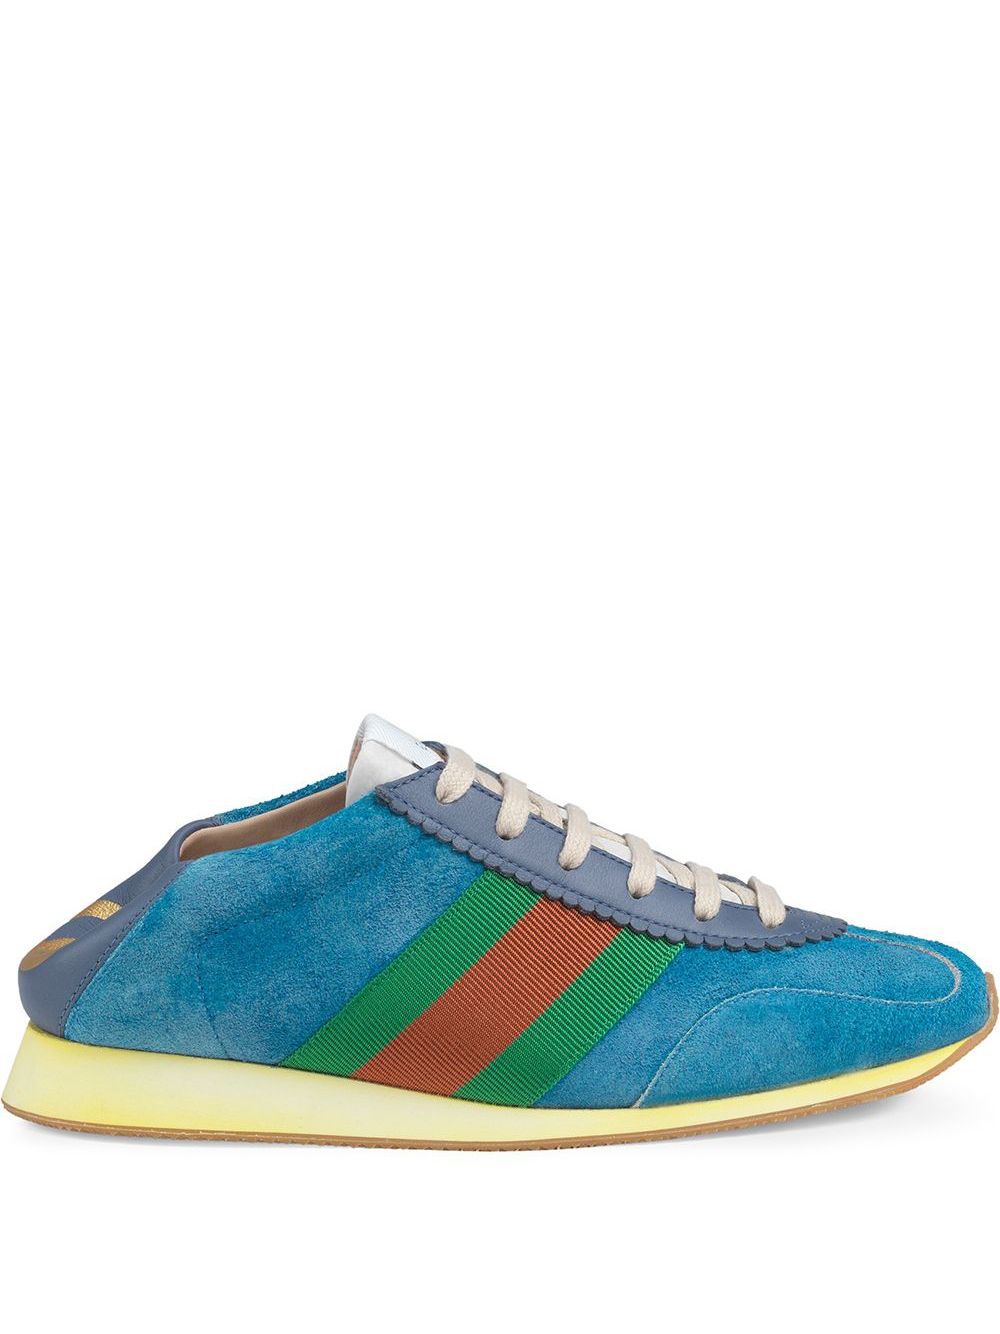 Shop blue Gucci Suede sneaker with Web with Express Delivery - Farfetch